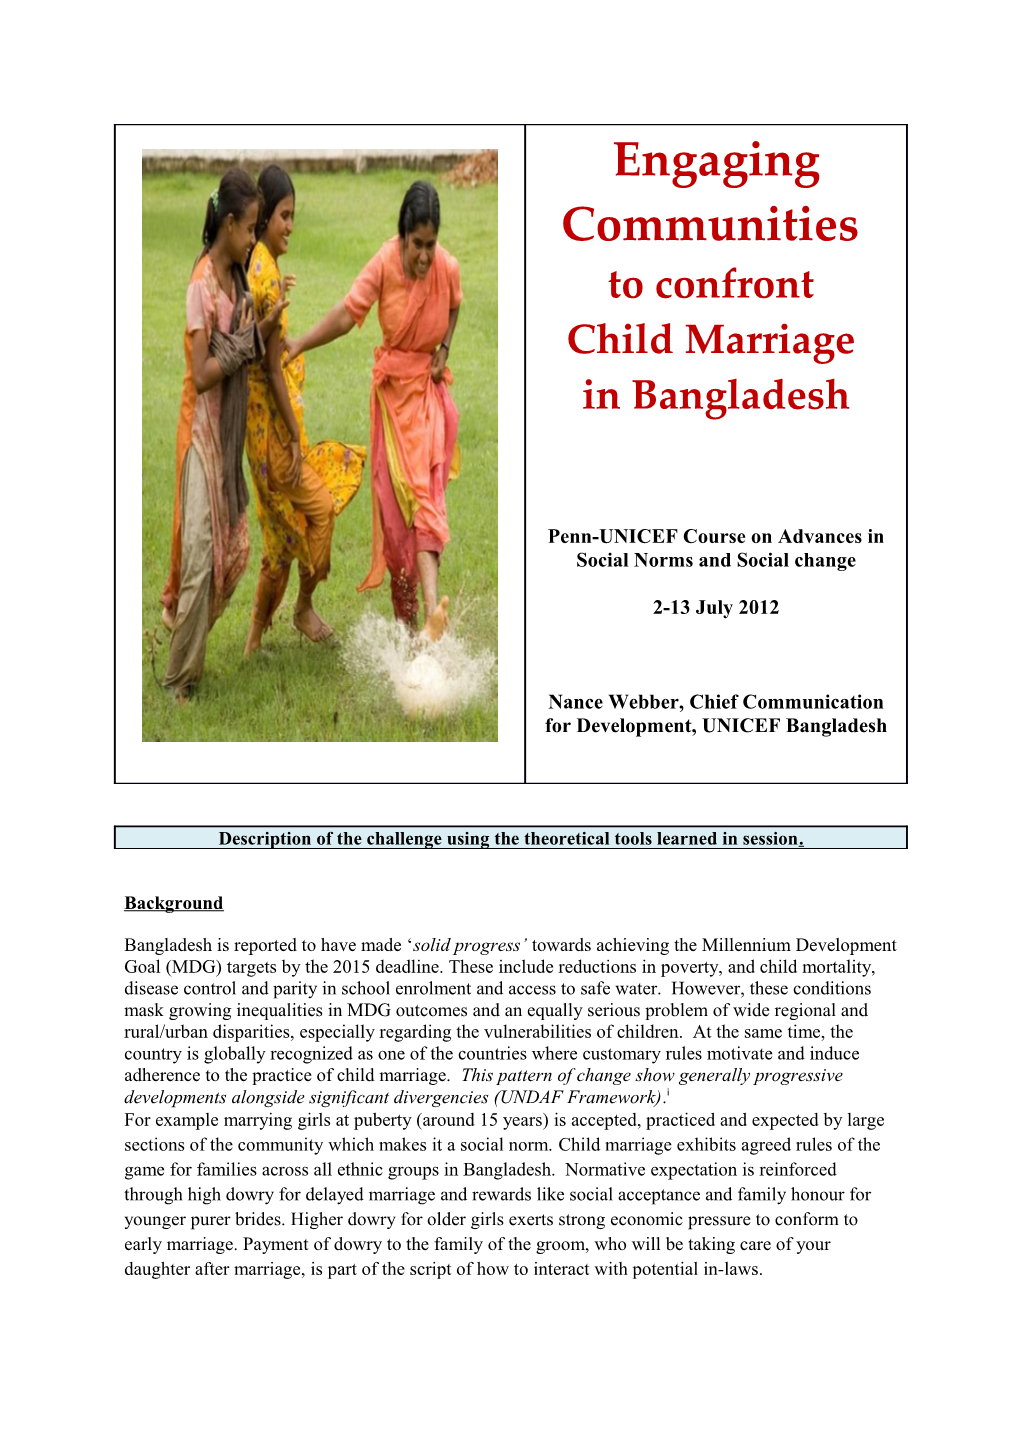 Bangladesh Is Reported to Have Made Solid Progress Towards Achieving the Millennium Development